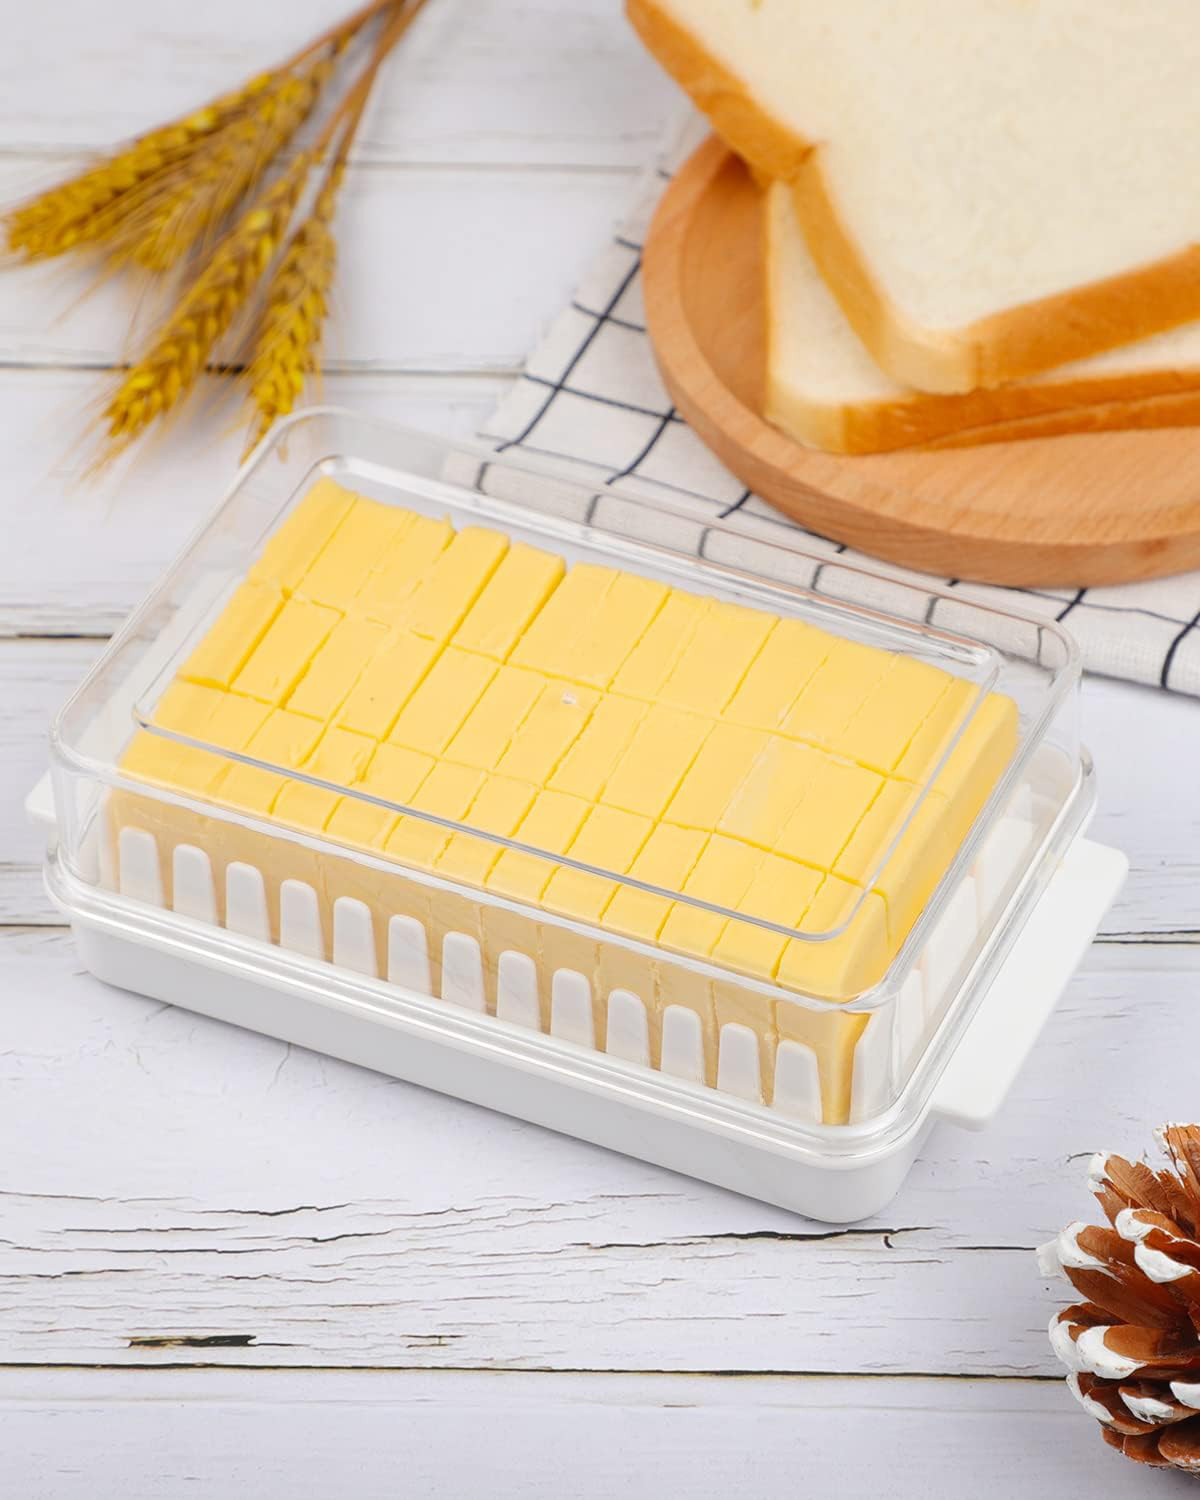 Kuber Industries Butter Box|Plastic Butter Keeper for Refrigerator|Butter Storage Box with Cutting Guide|Butter Dish with Lid For Countertop (White)